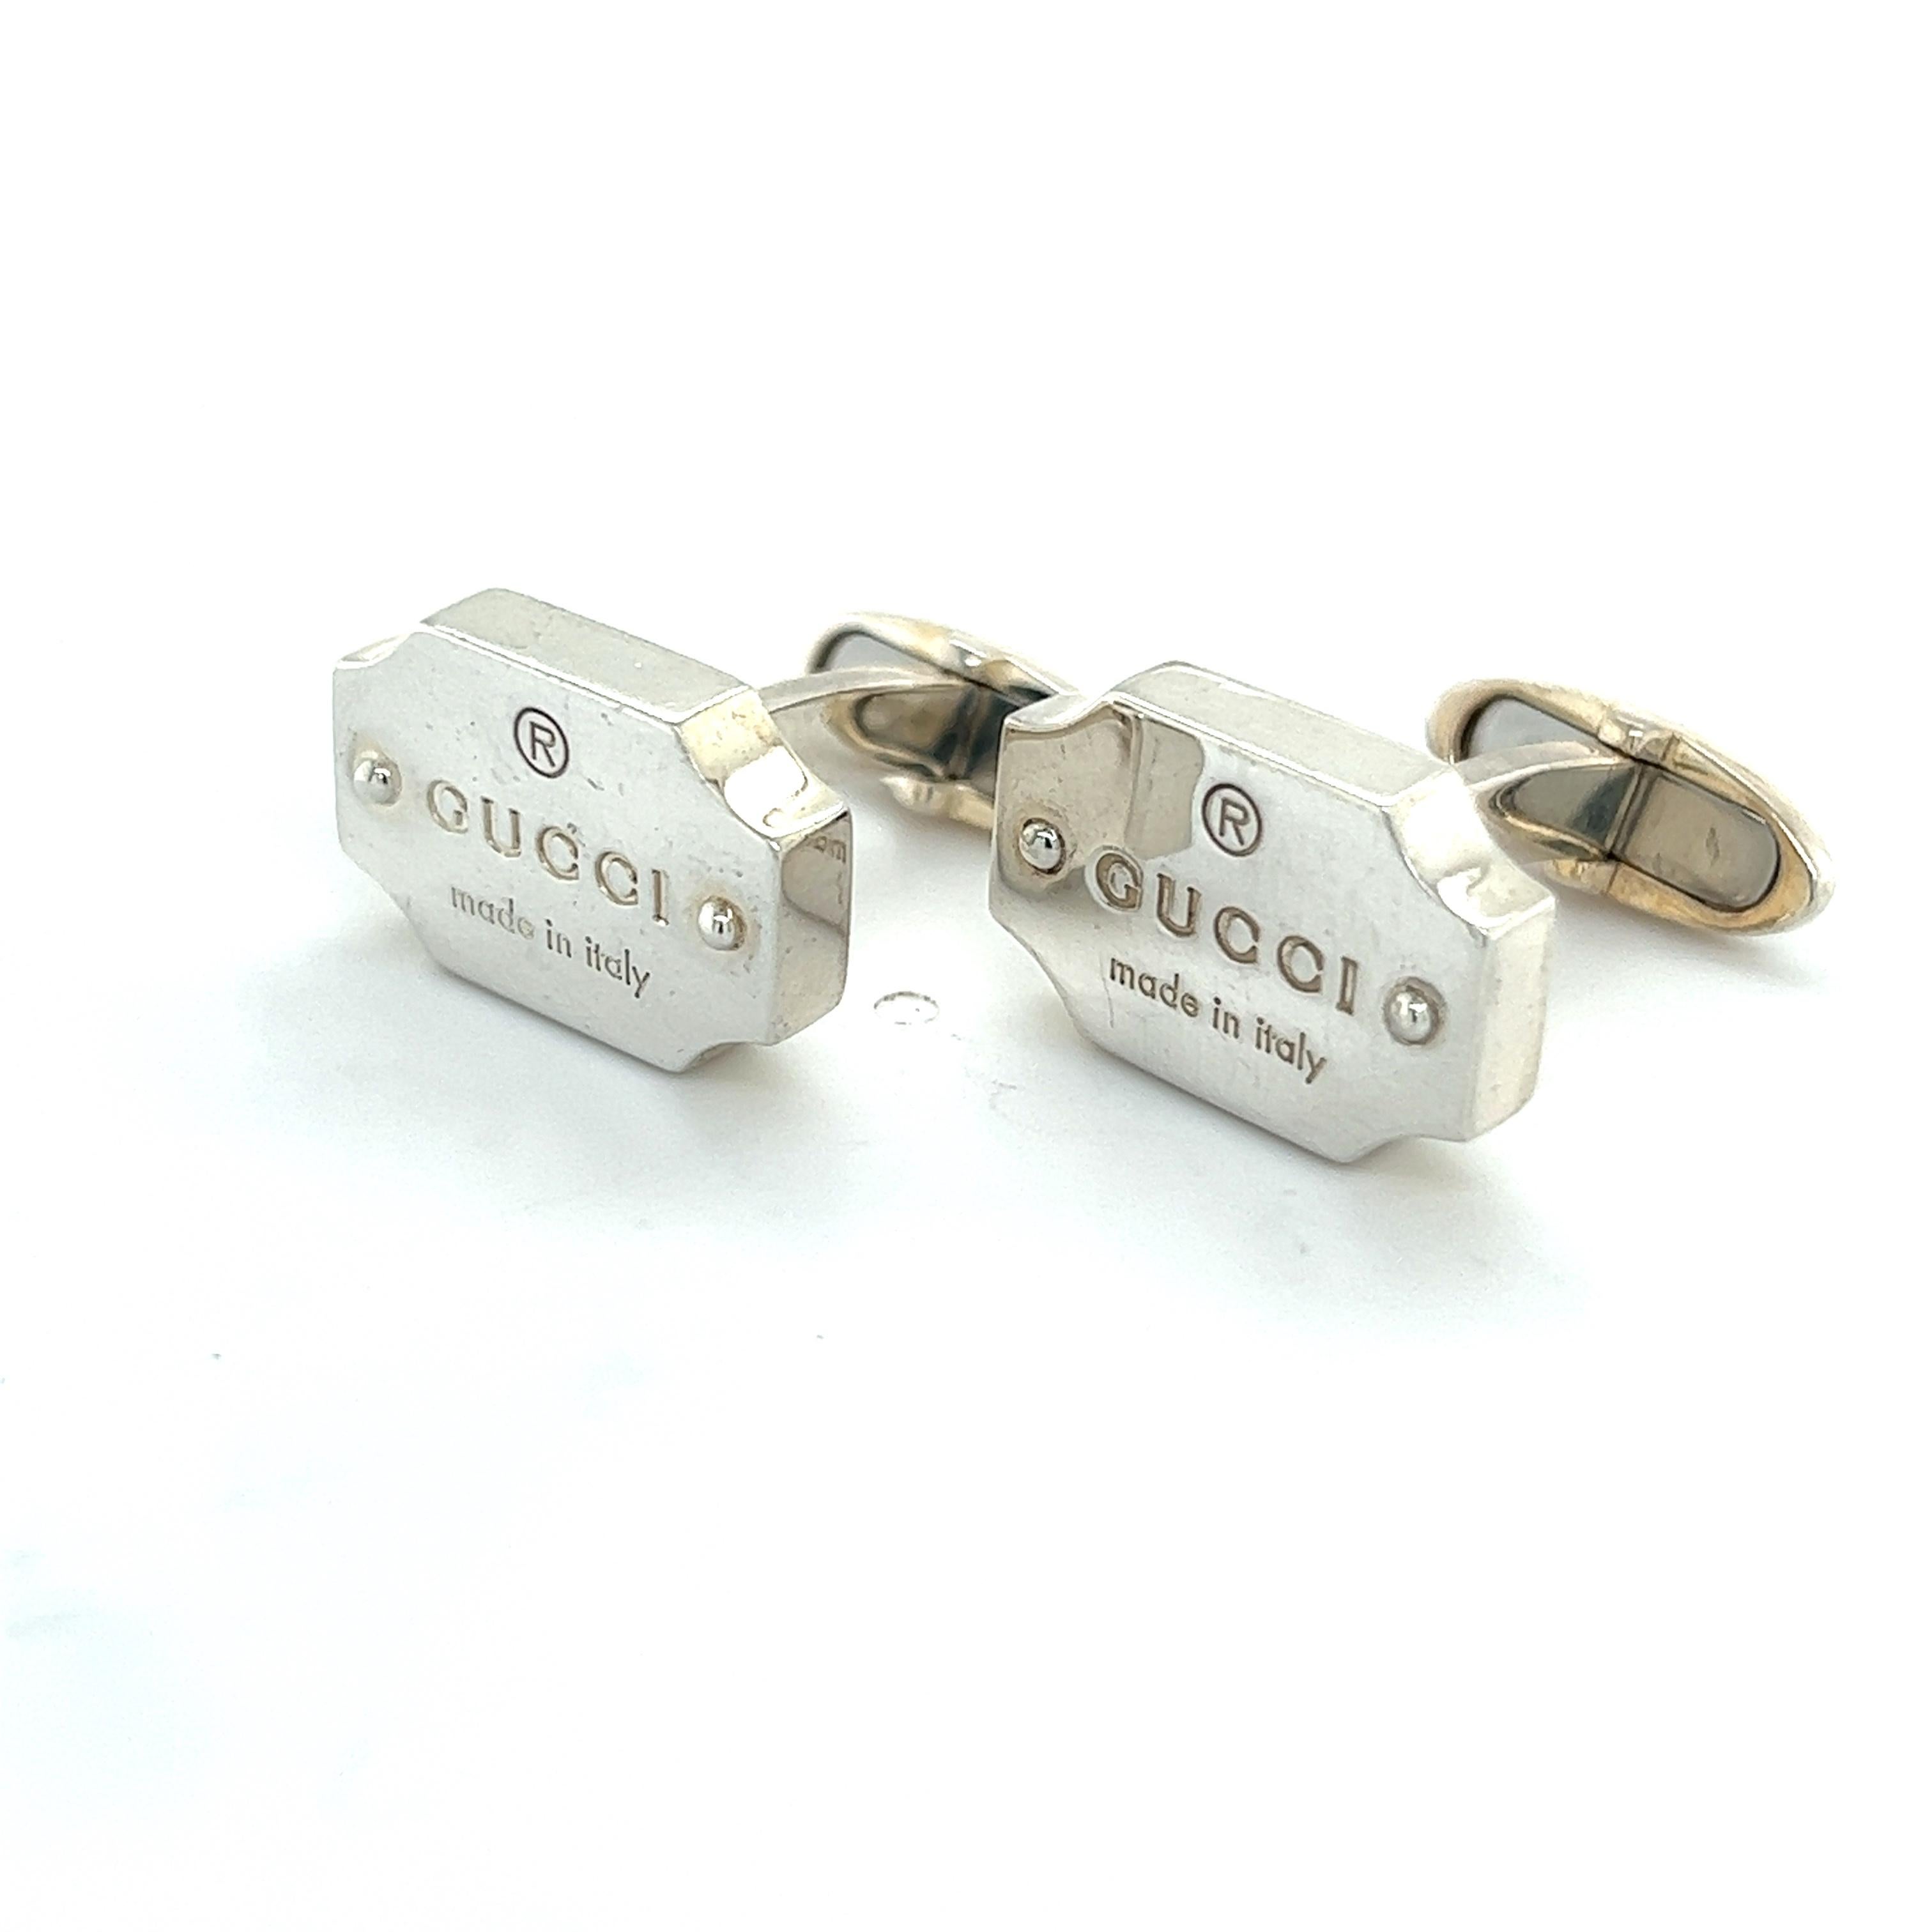 Authentic Gucci Estate Mens Cufflinks Sterling Silver G11

These elegant Authentic Gucci cufflinks are made of sterling silver and have a weight of 16.9 grams.

MADE IN ITALY

TRUSTED SELLER SINCE 2002

PLEASE SEE OUR HUNDREDS OF POSITIVE FEEDBACKS